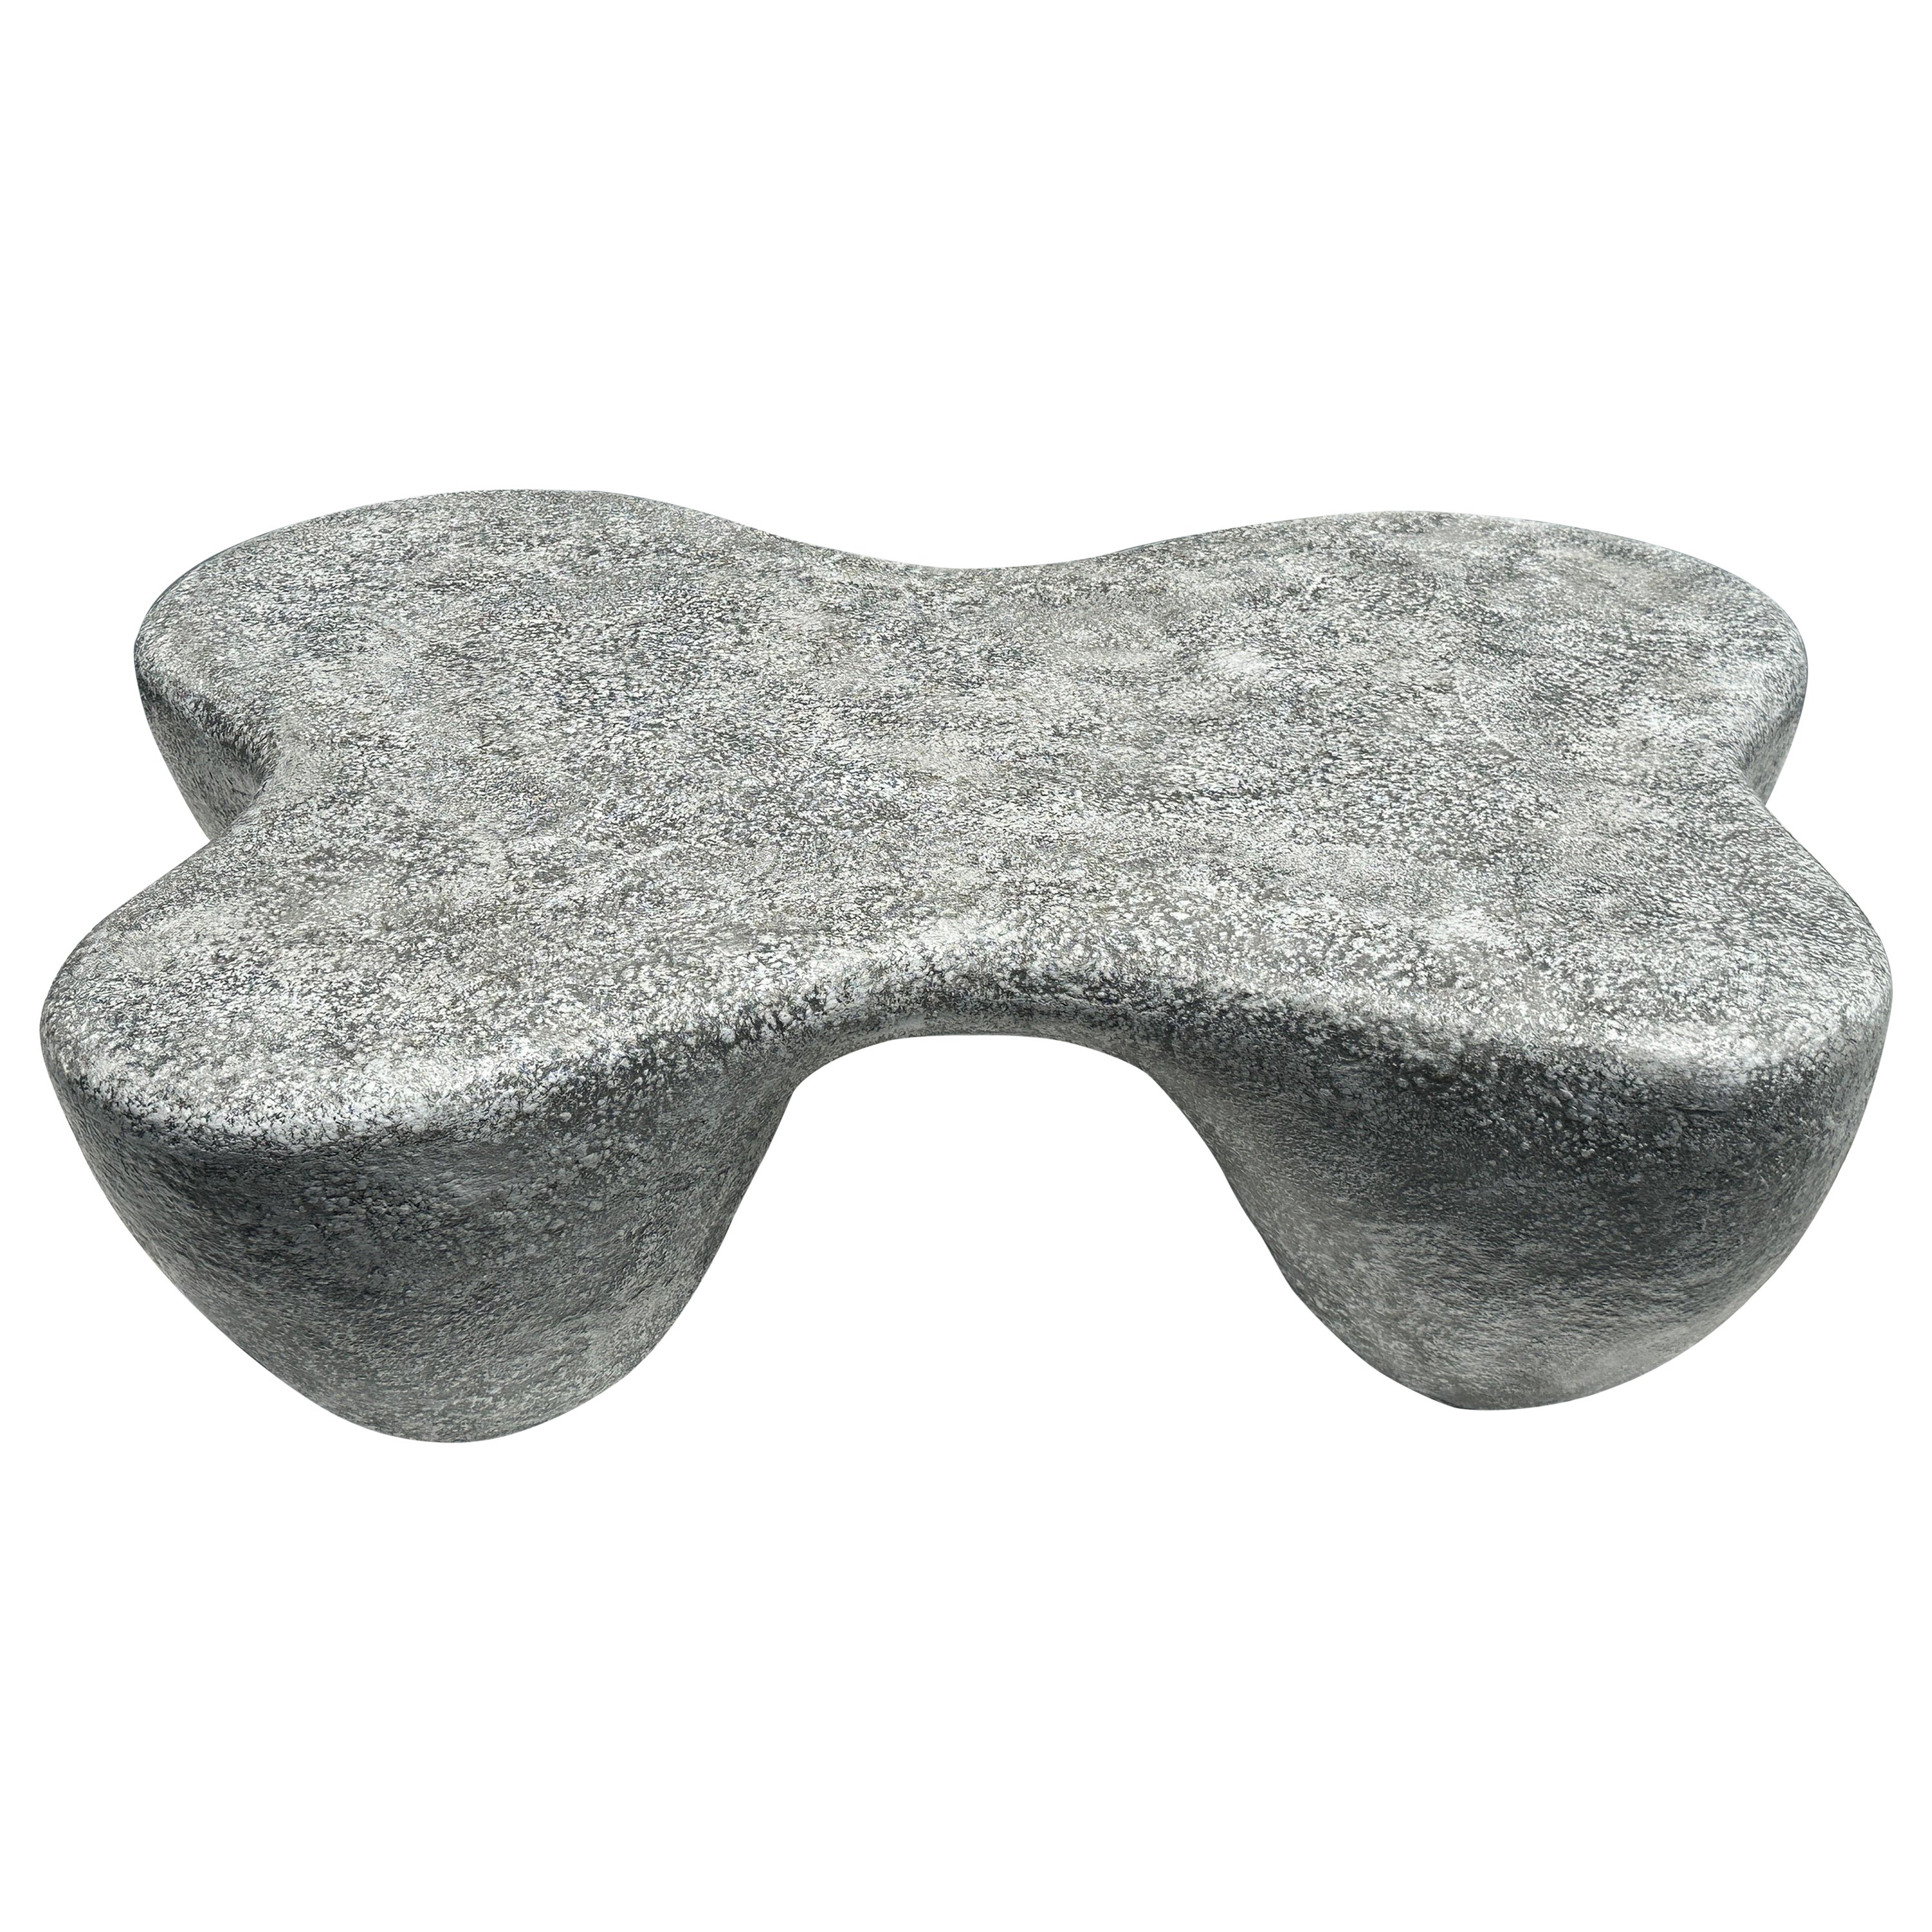 Organic Shaped Faux Concrete Coffee Table For Sale